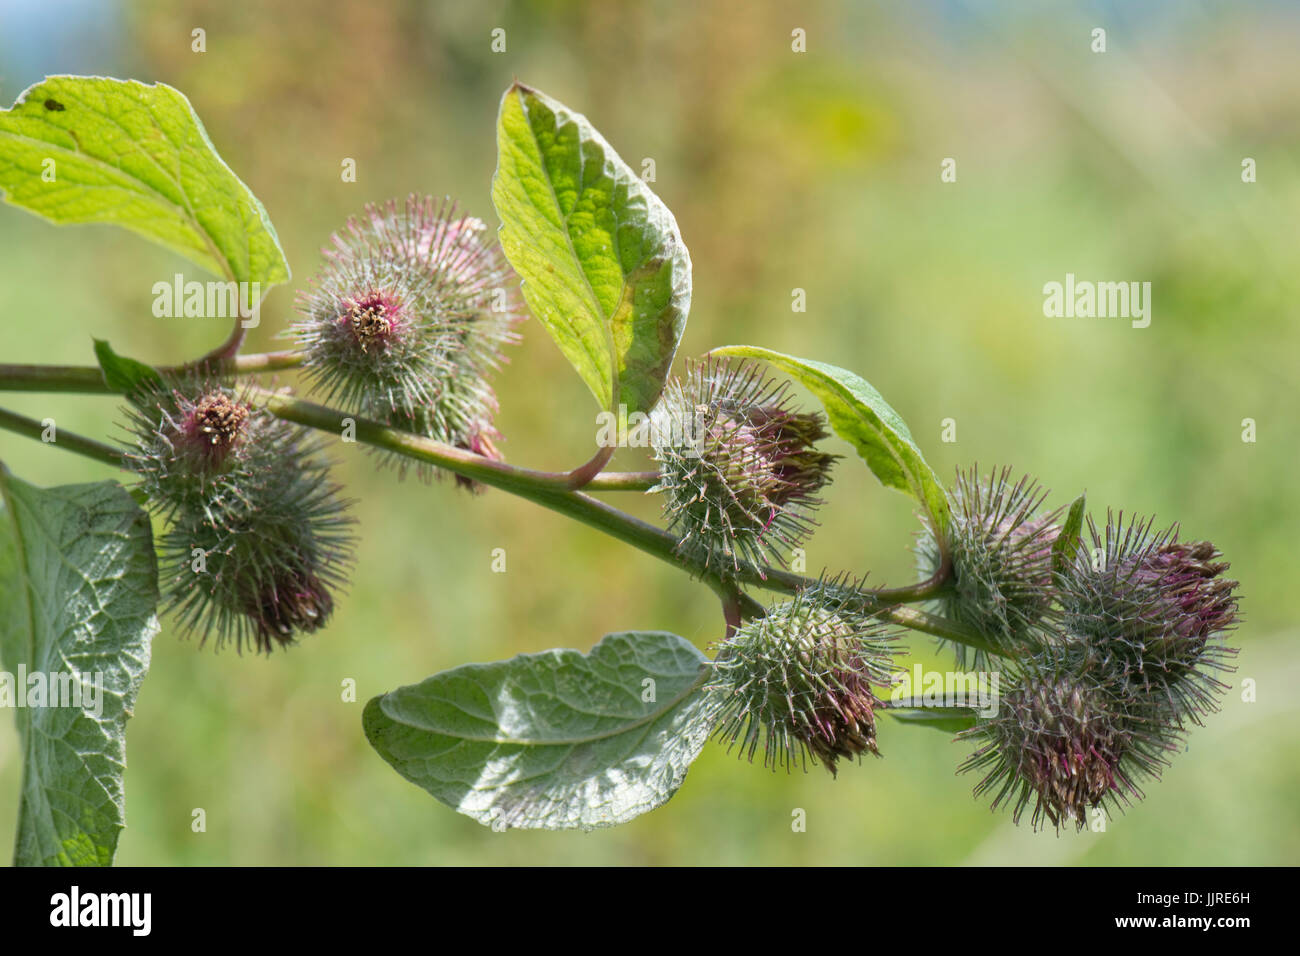 Lesser burdock, Arctium minus, flowers dying and producing seeds covered in small hooks like velcro which help in dispersal in the fur of animals, Jul Stock Photo